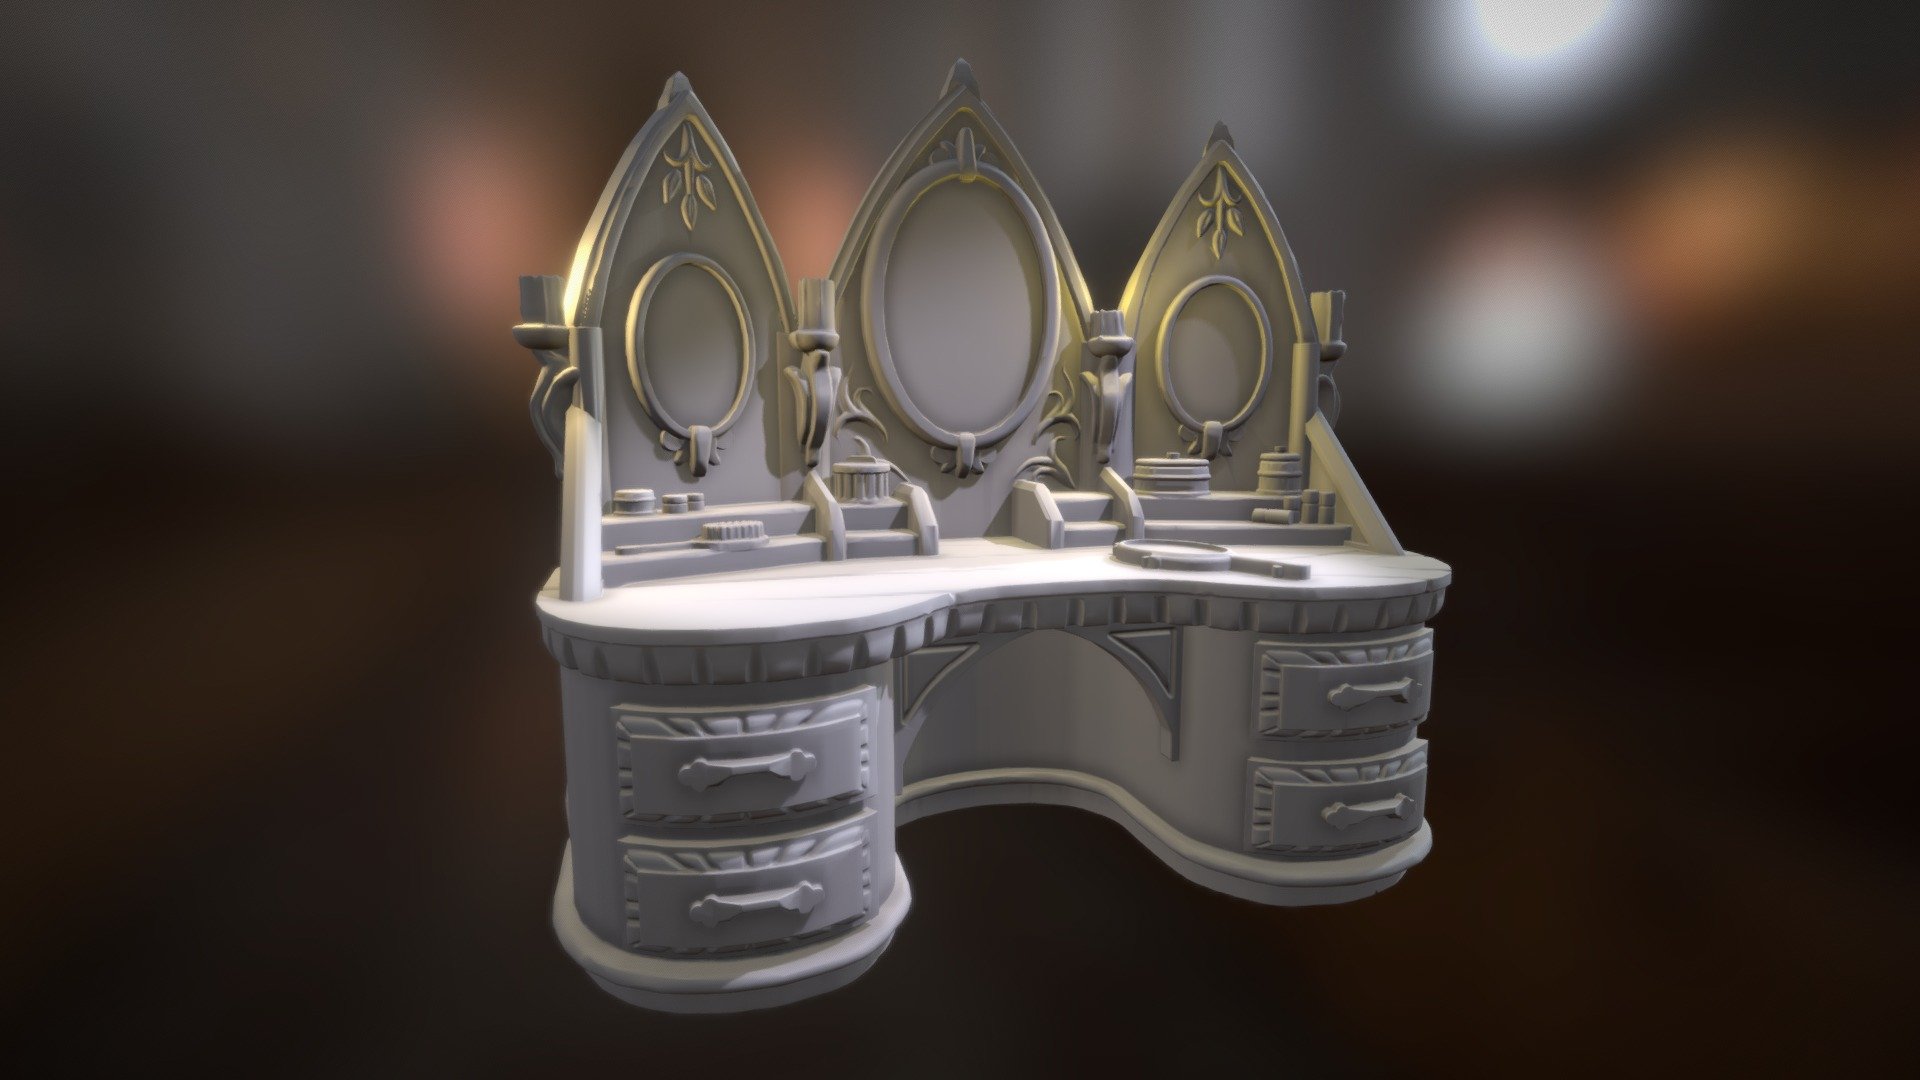 Miniature 3D printable fancy desk for D&amp;D and tabletop games!

File available for purchase in a 3D-Printable set from Infinite Dimensions Games:
https://www.infinitedimensions.ca/product/3d-printable-noblemans-furnishings/ - Miniature 3D Printable Fancy Desk - 3D model by Rita Puhakka (@RitaPuhakka) 3d model